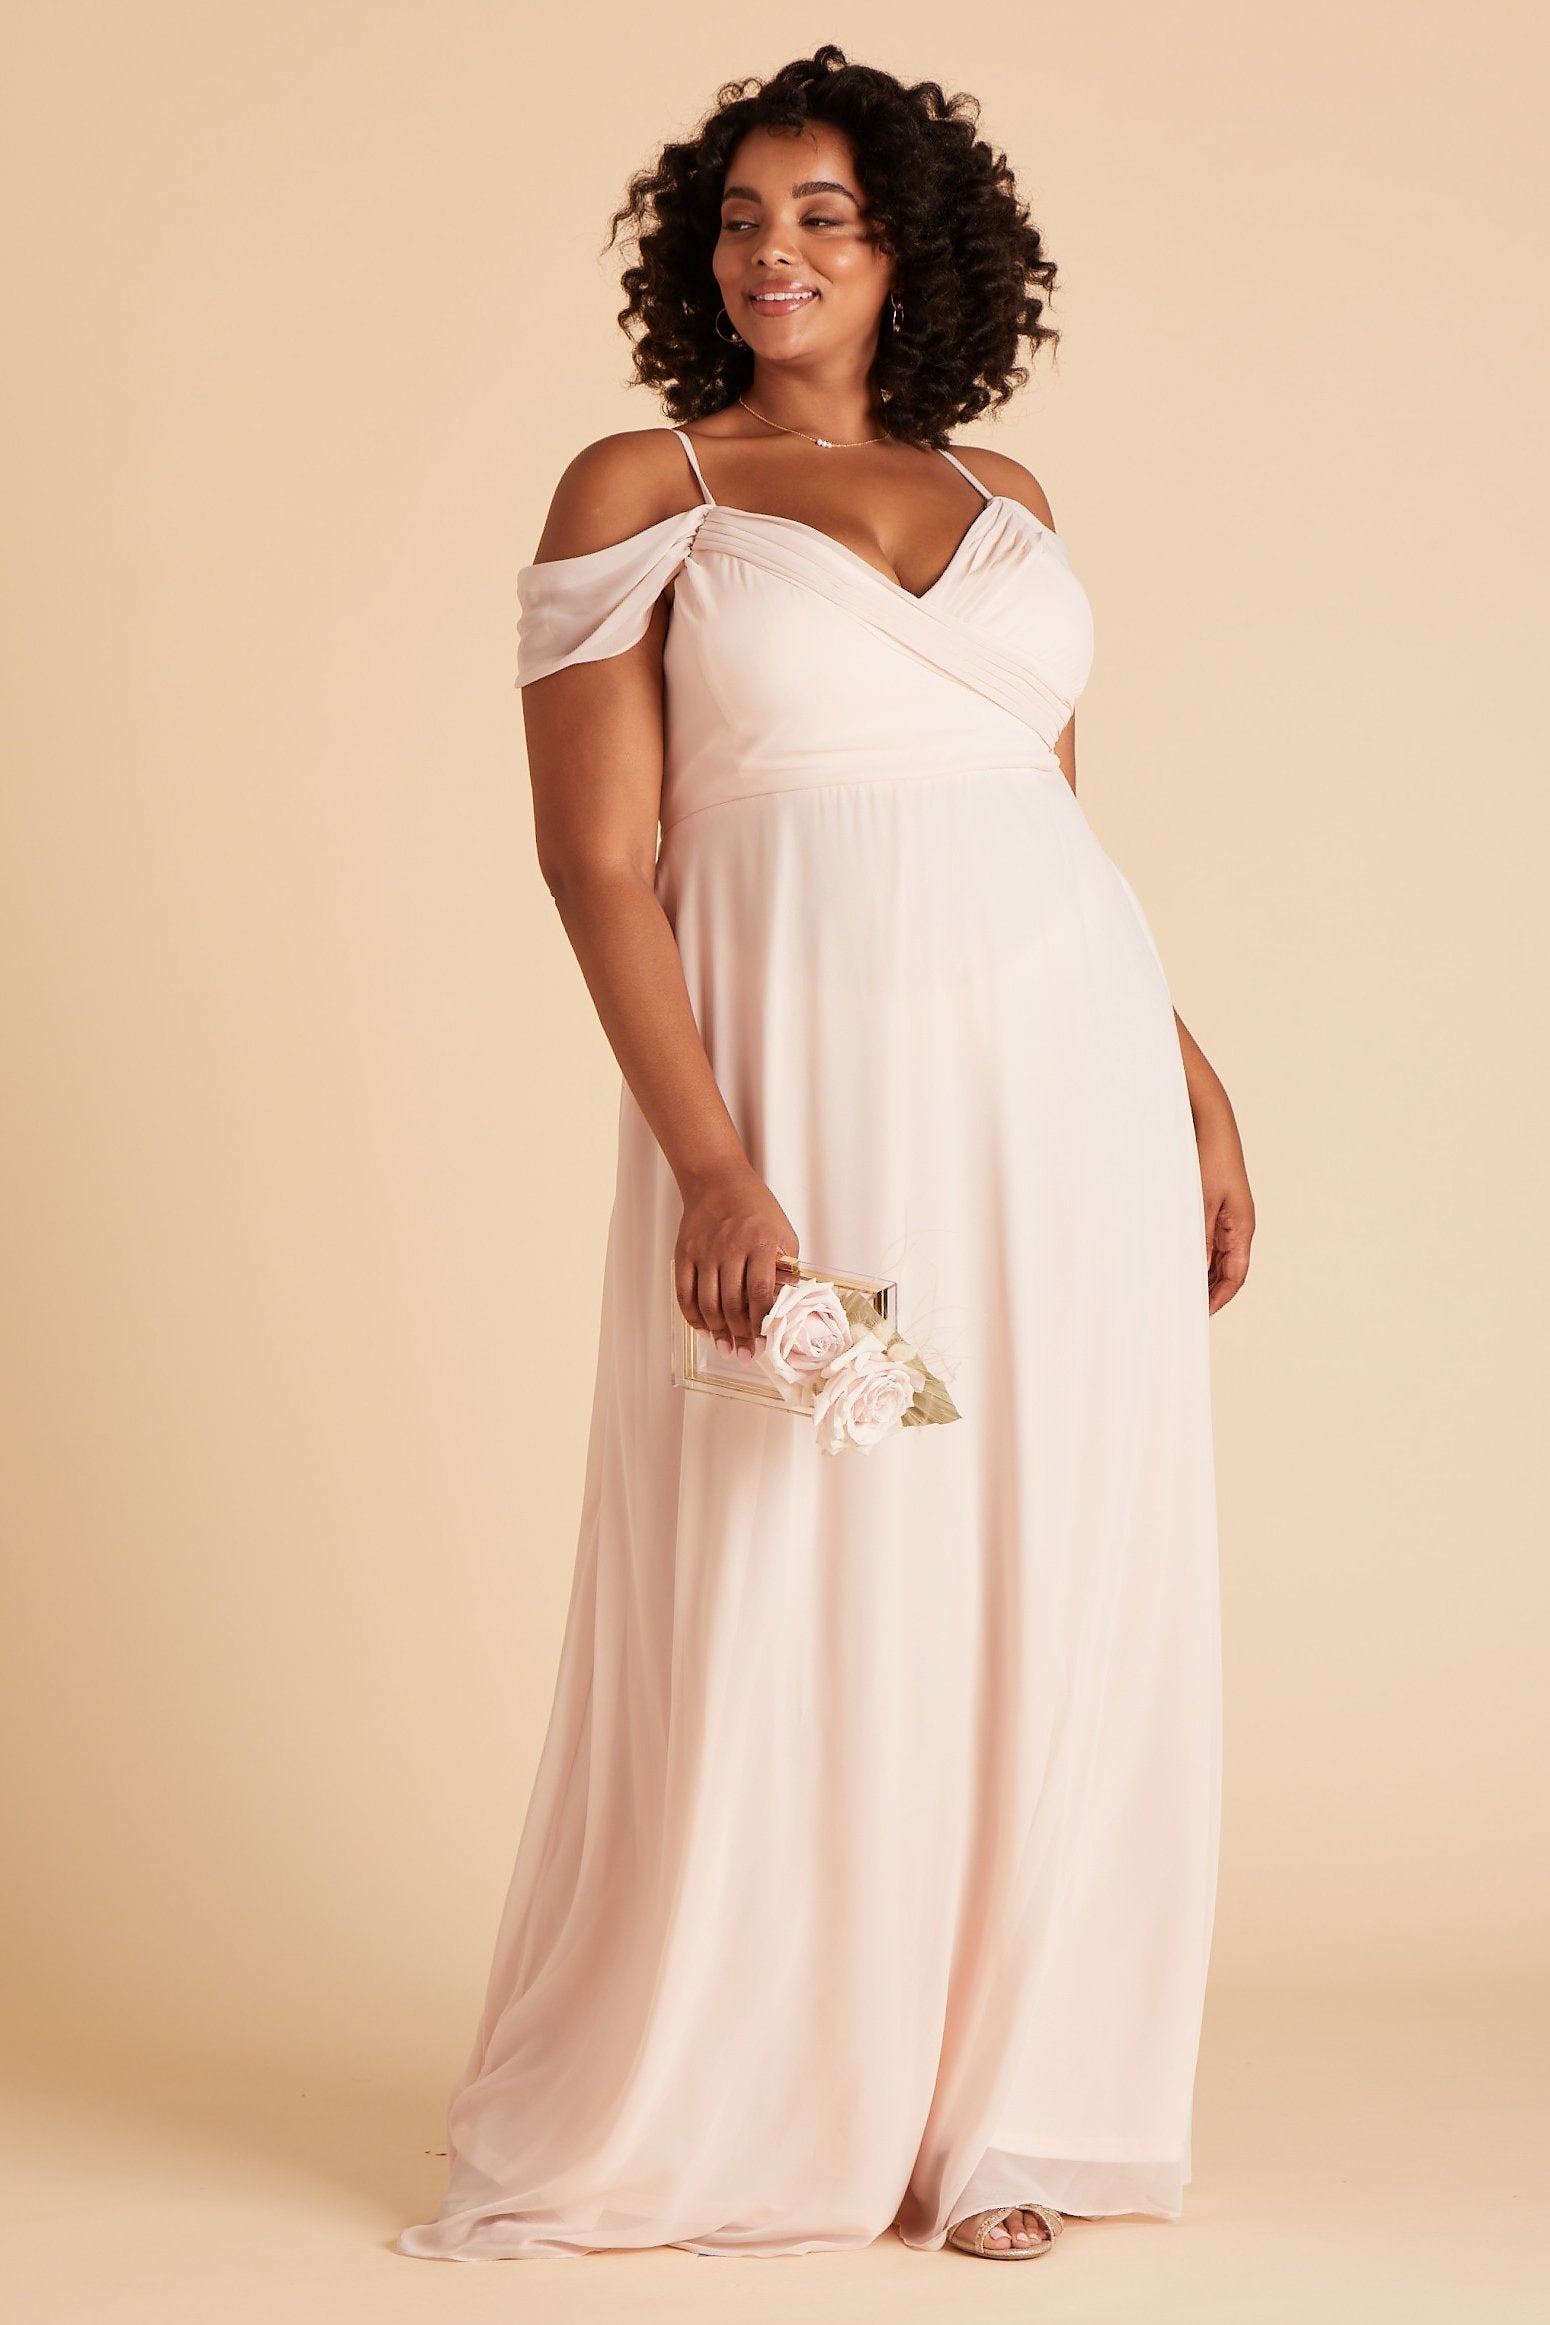 Spence convertible plus size bridesmaid dress in pale blush chiffon by Birdy Grey, front view